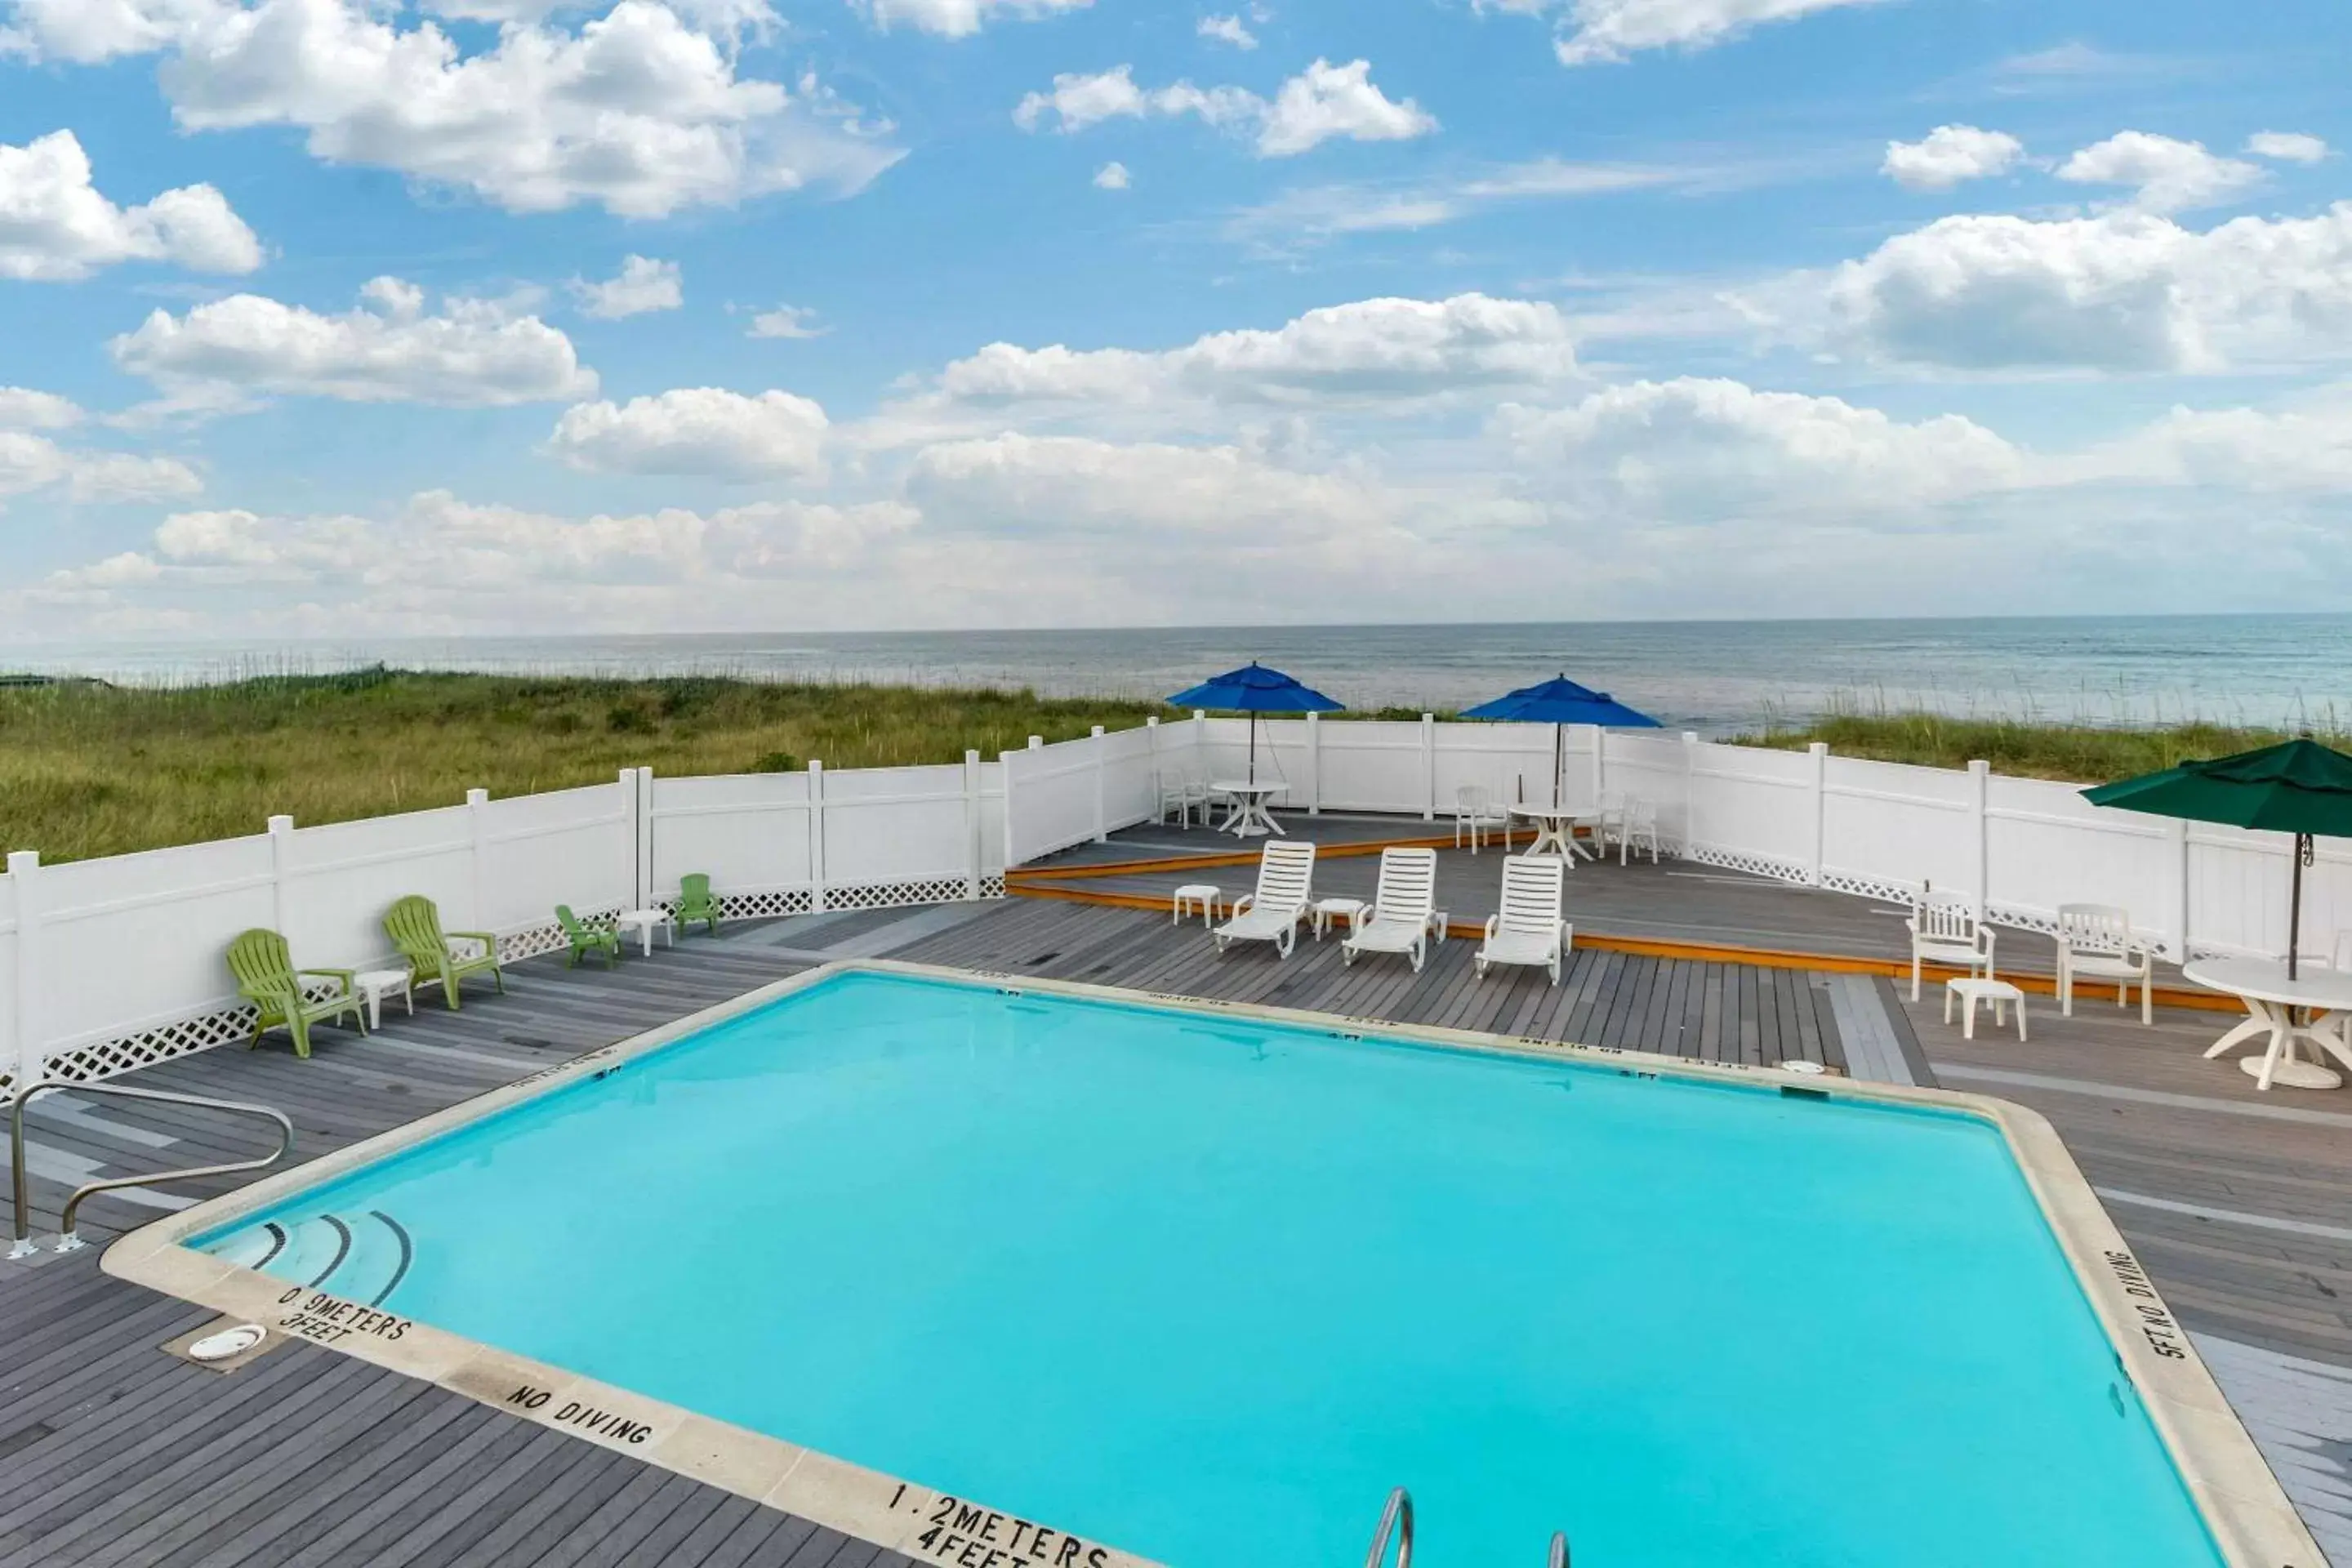 On site, Pool View in Quality Inn Carolina Oceanfront